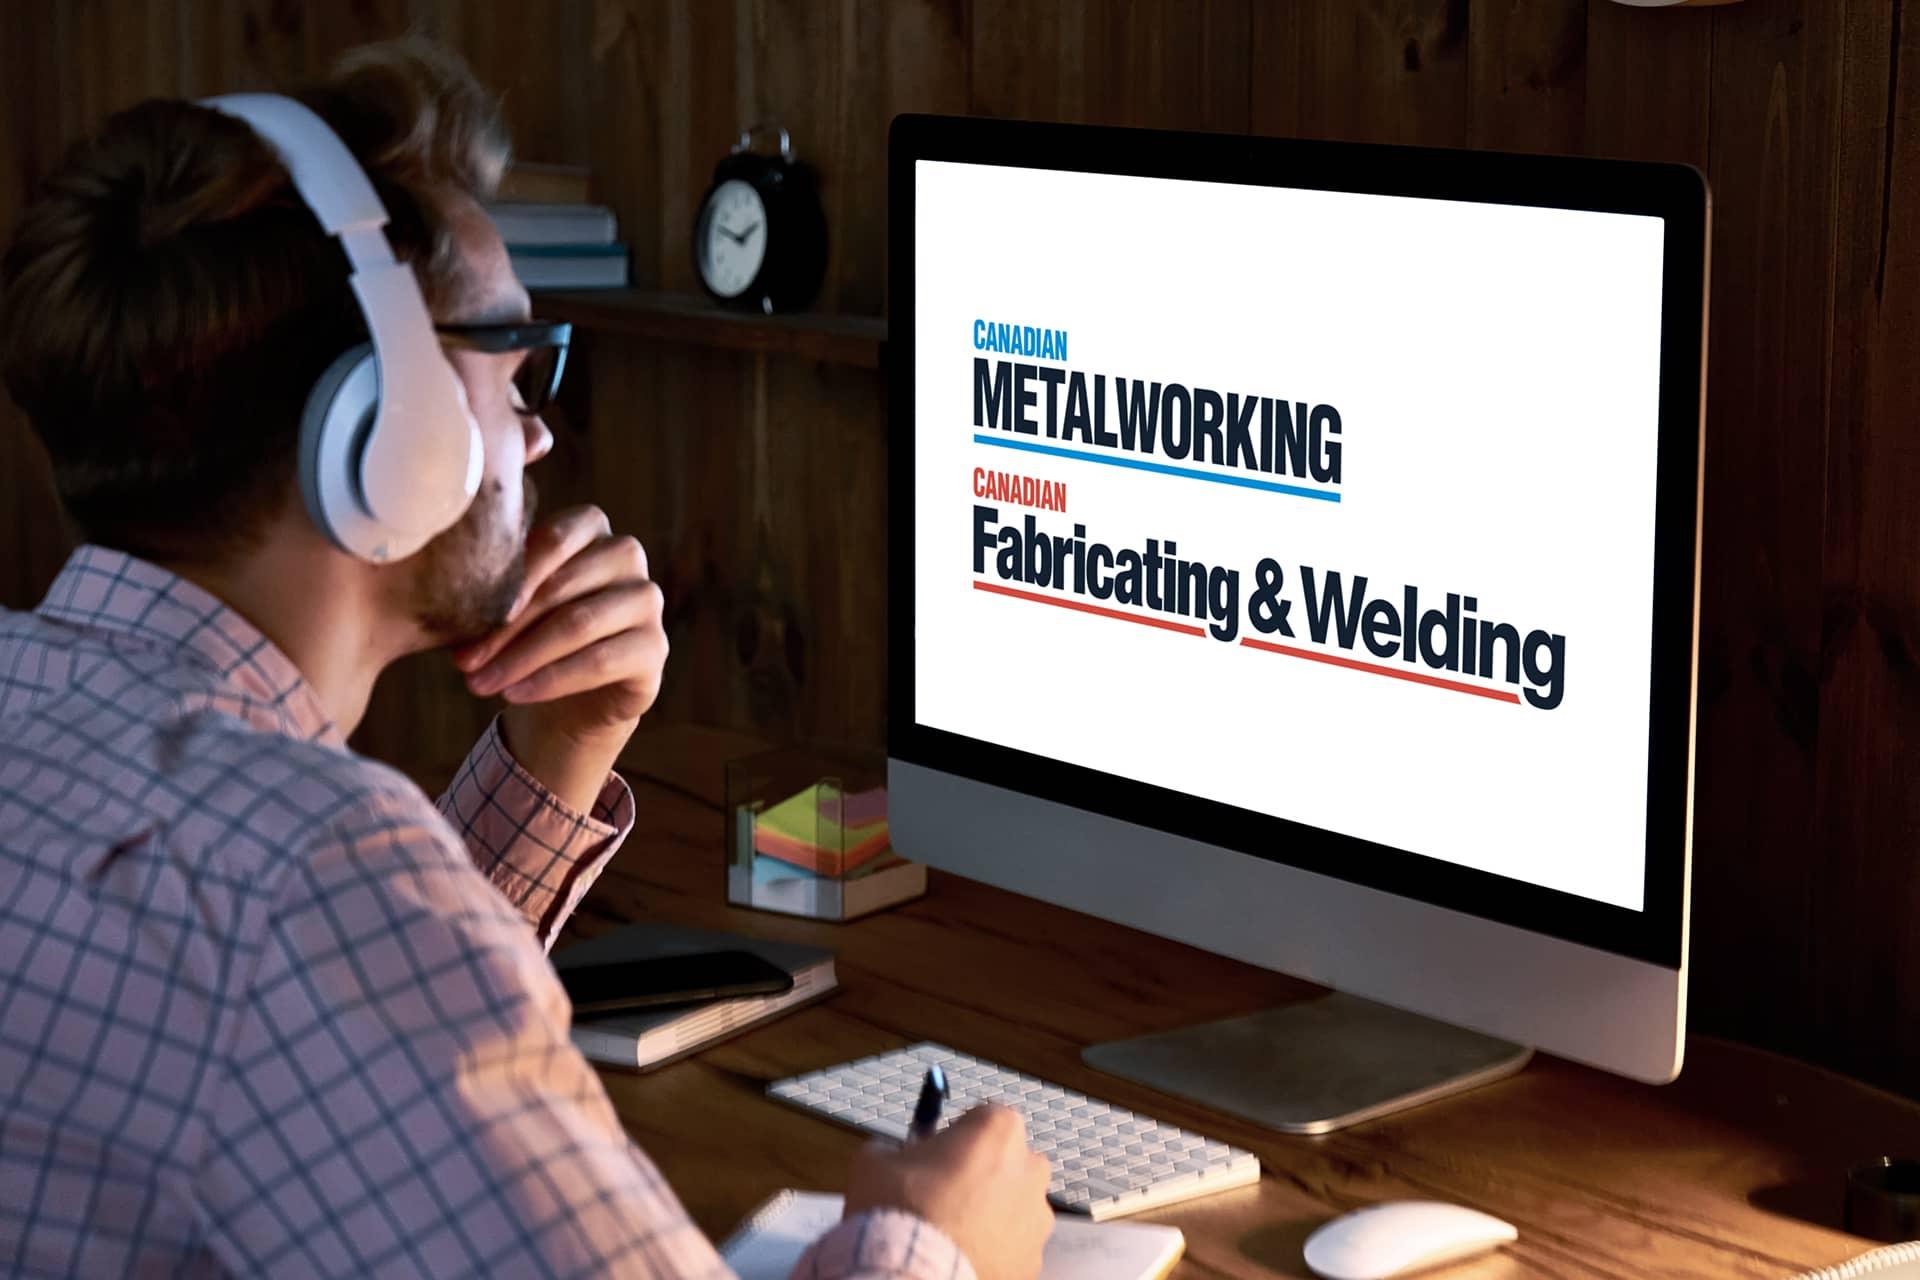 Get your target customers' undivided attention with Canadian Metalworking and Canadian Fabricating & Welding live webinars